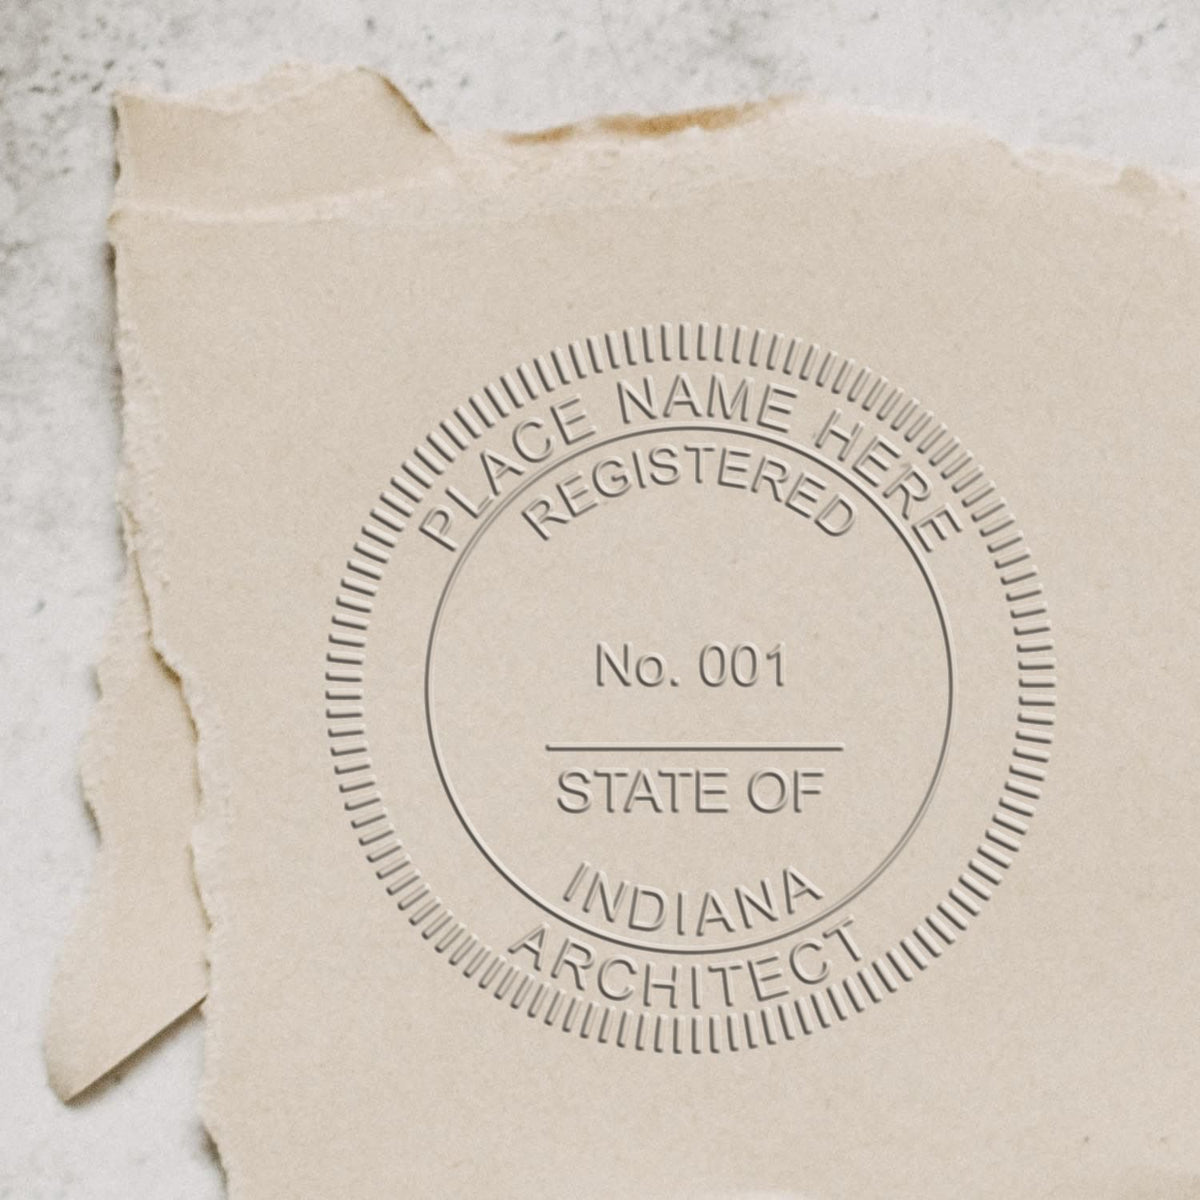 An in use photo of the Hybrid Indiana Architect Seal showing a sample imprint on a cardstock